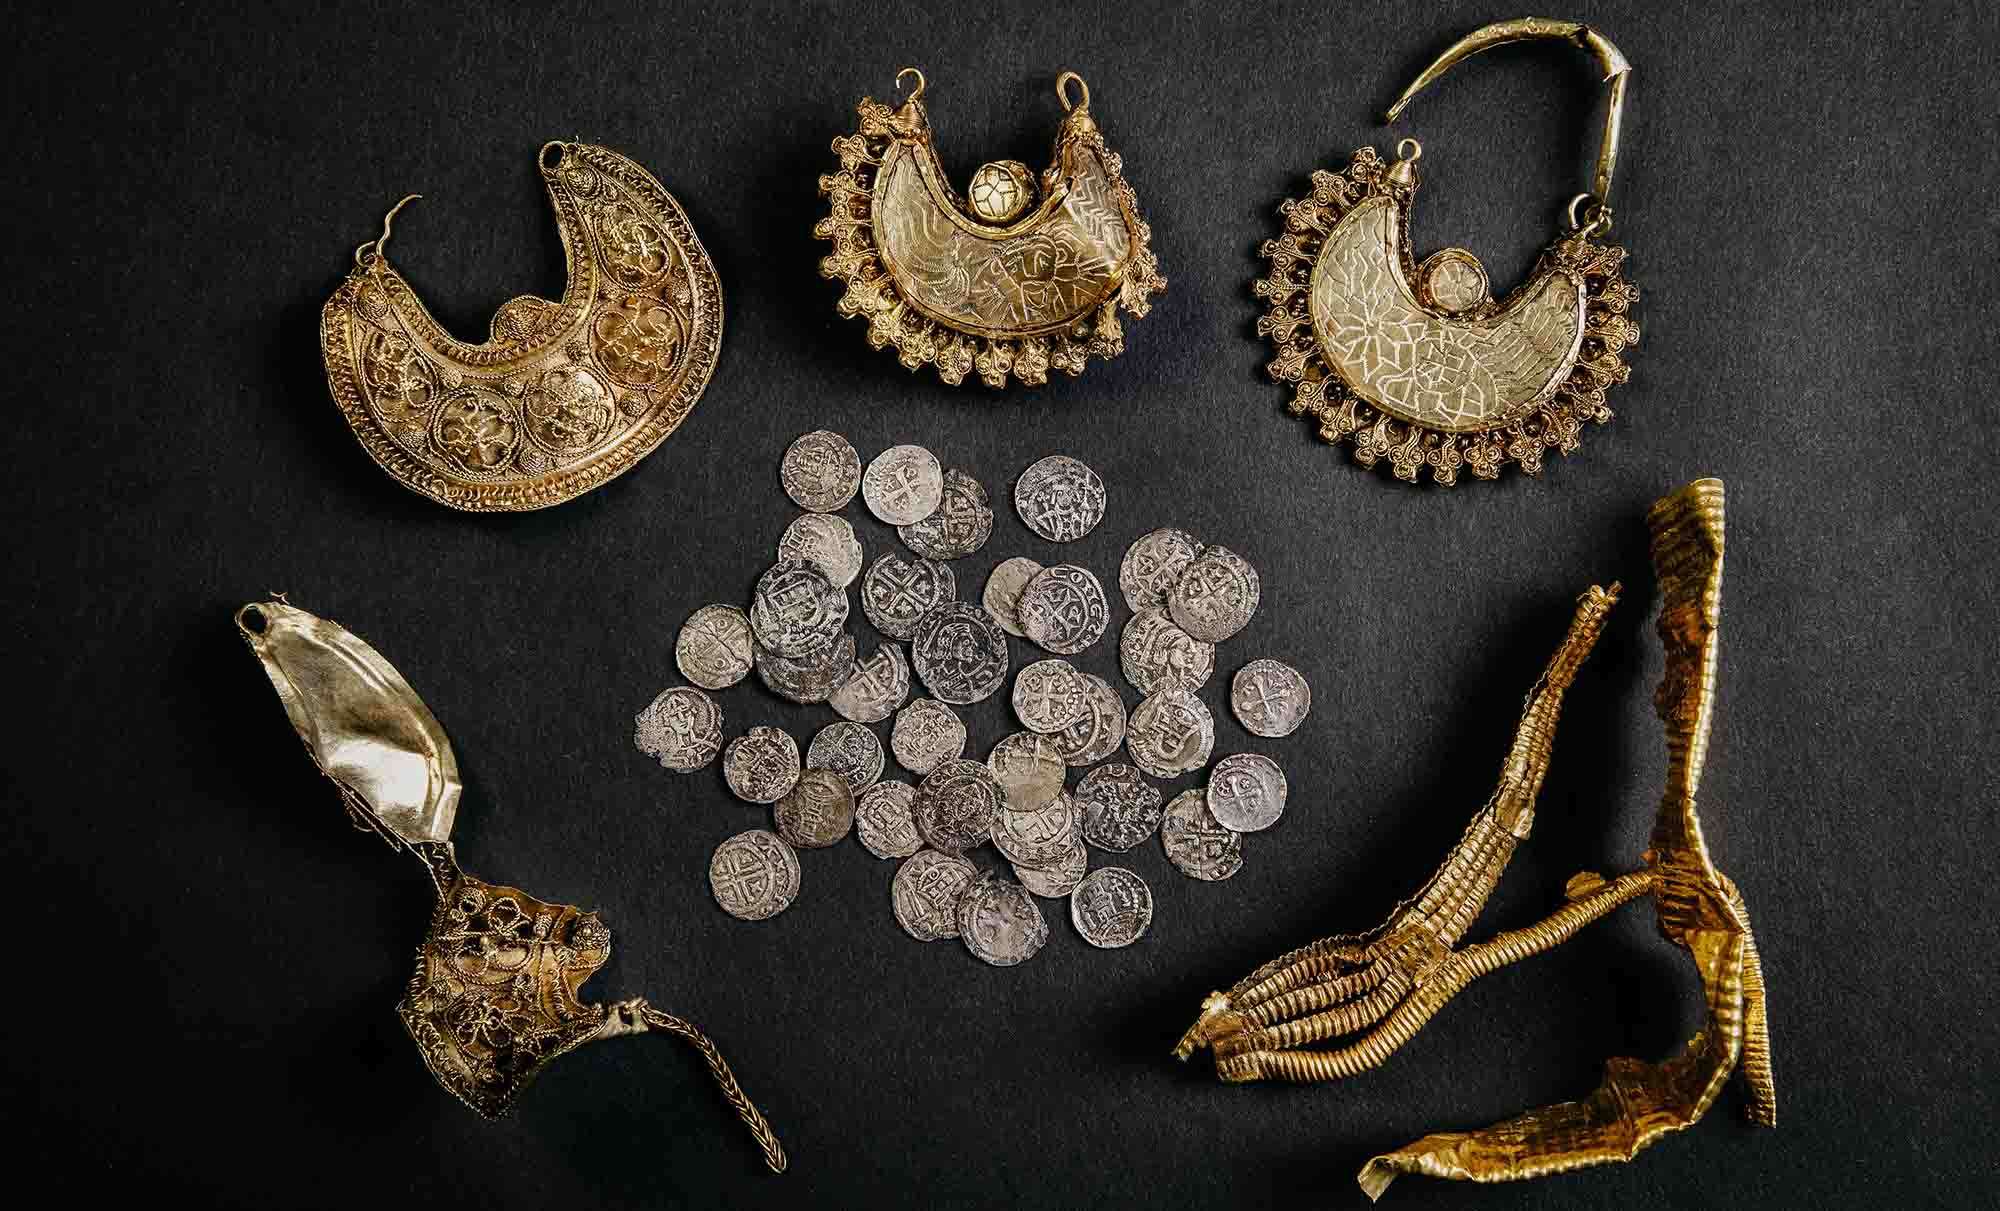 Historian Finds Unique 1,000-Year-Old Mediaeval Gold Treasure Using Metal Detector